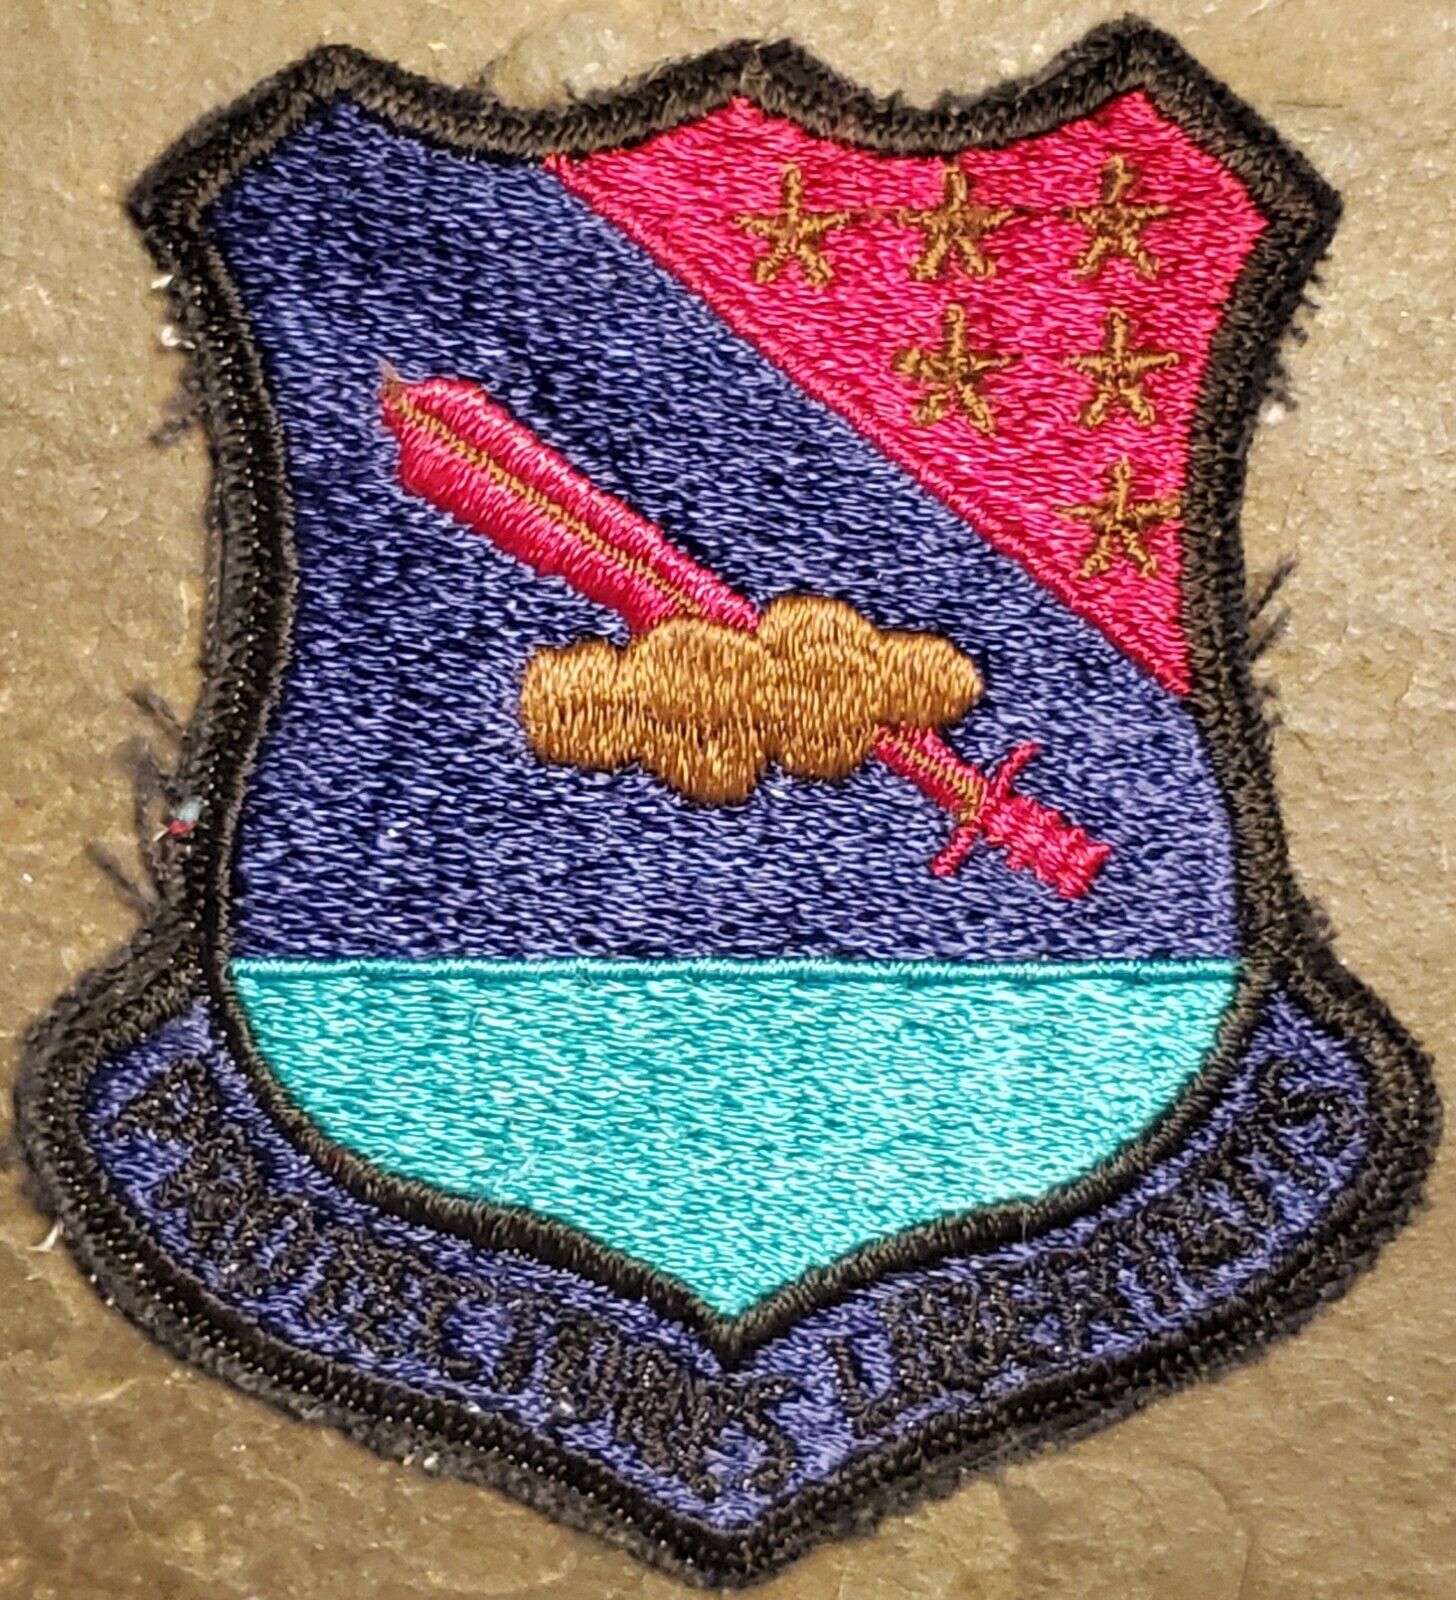 USAF Air Force Patch: 479th Tactical Fighter Wing HOLLOMAN AFB, NM subdued USGI